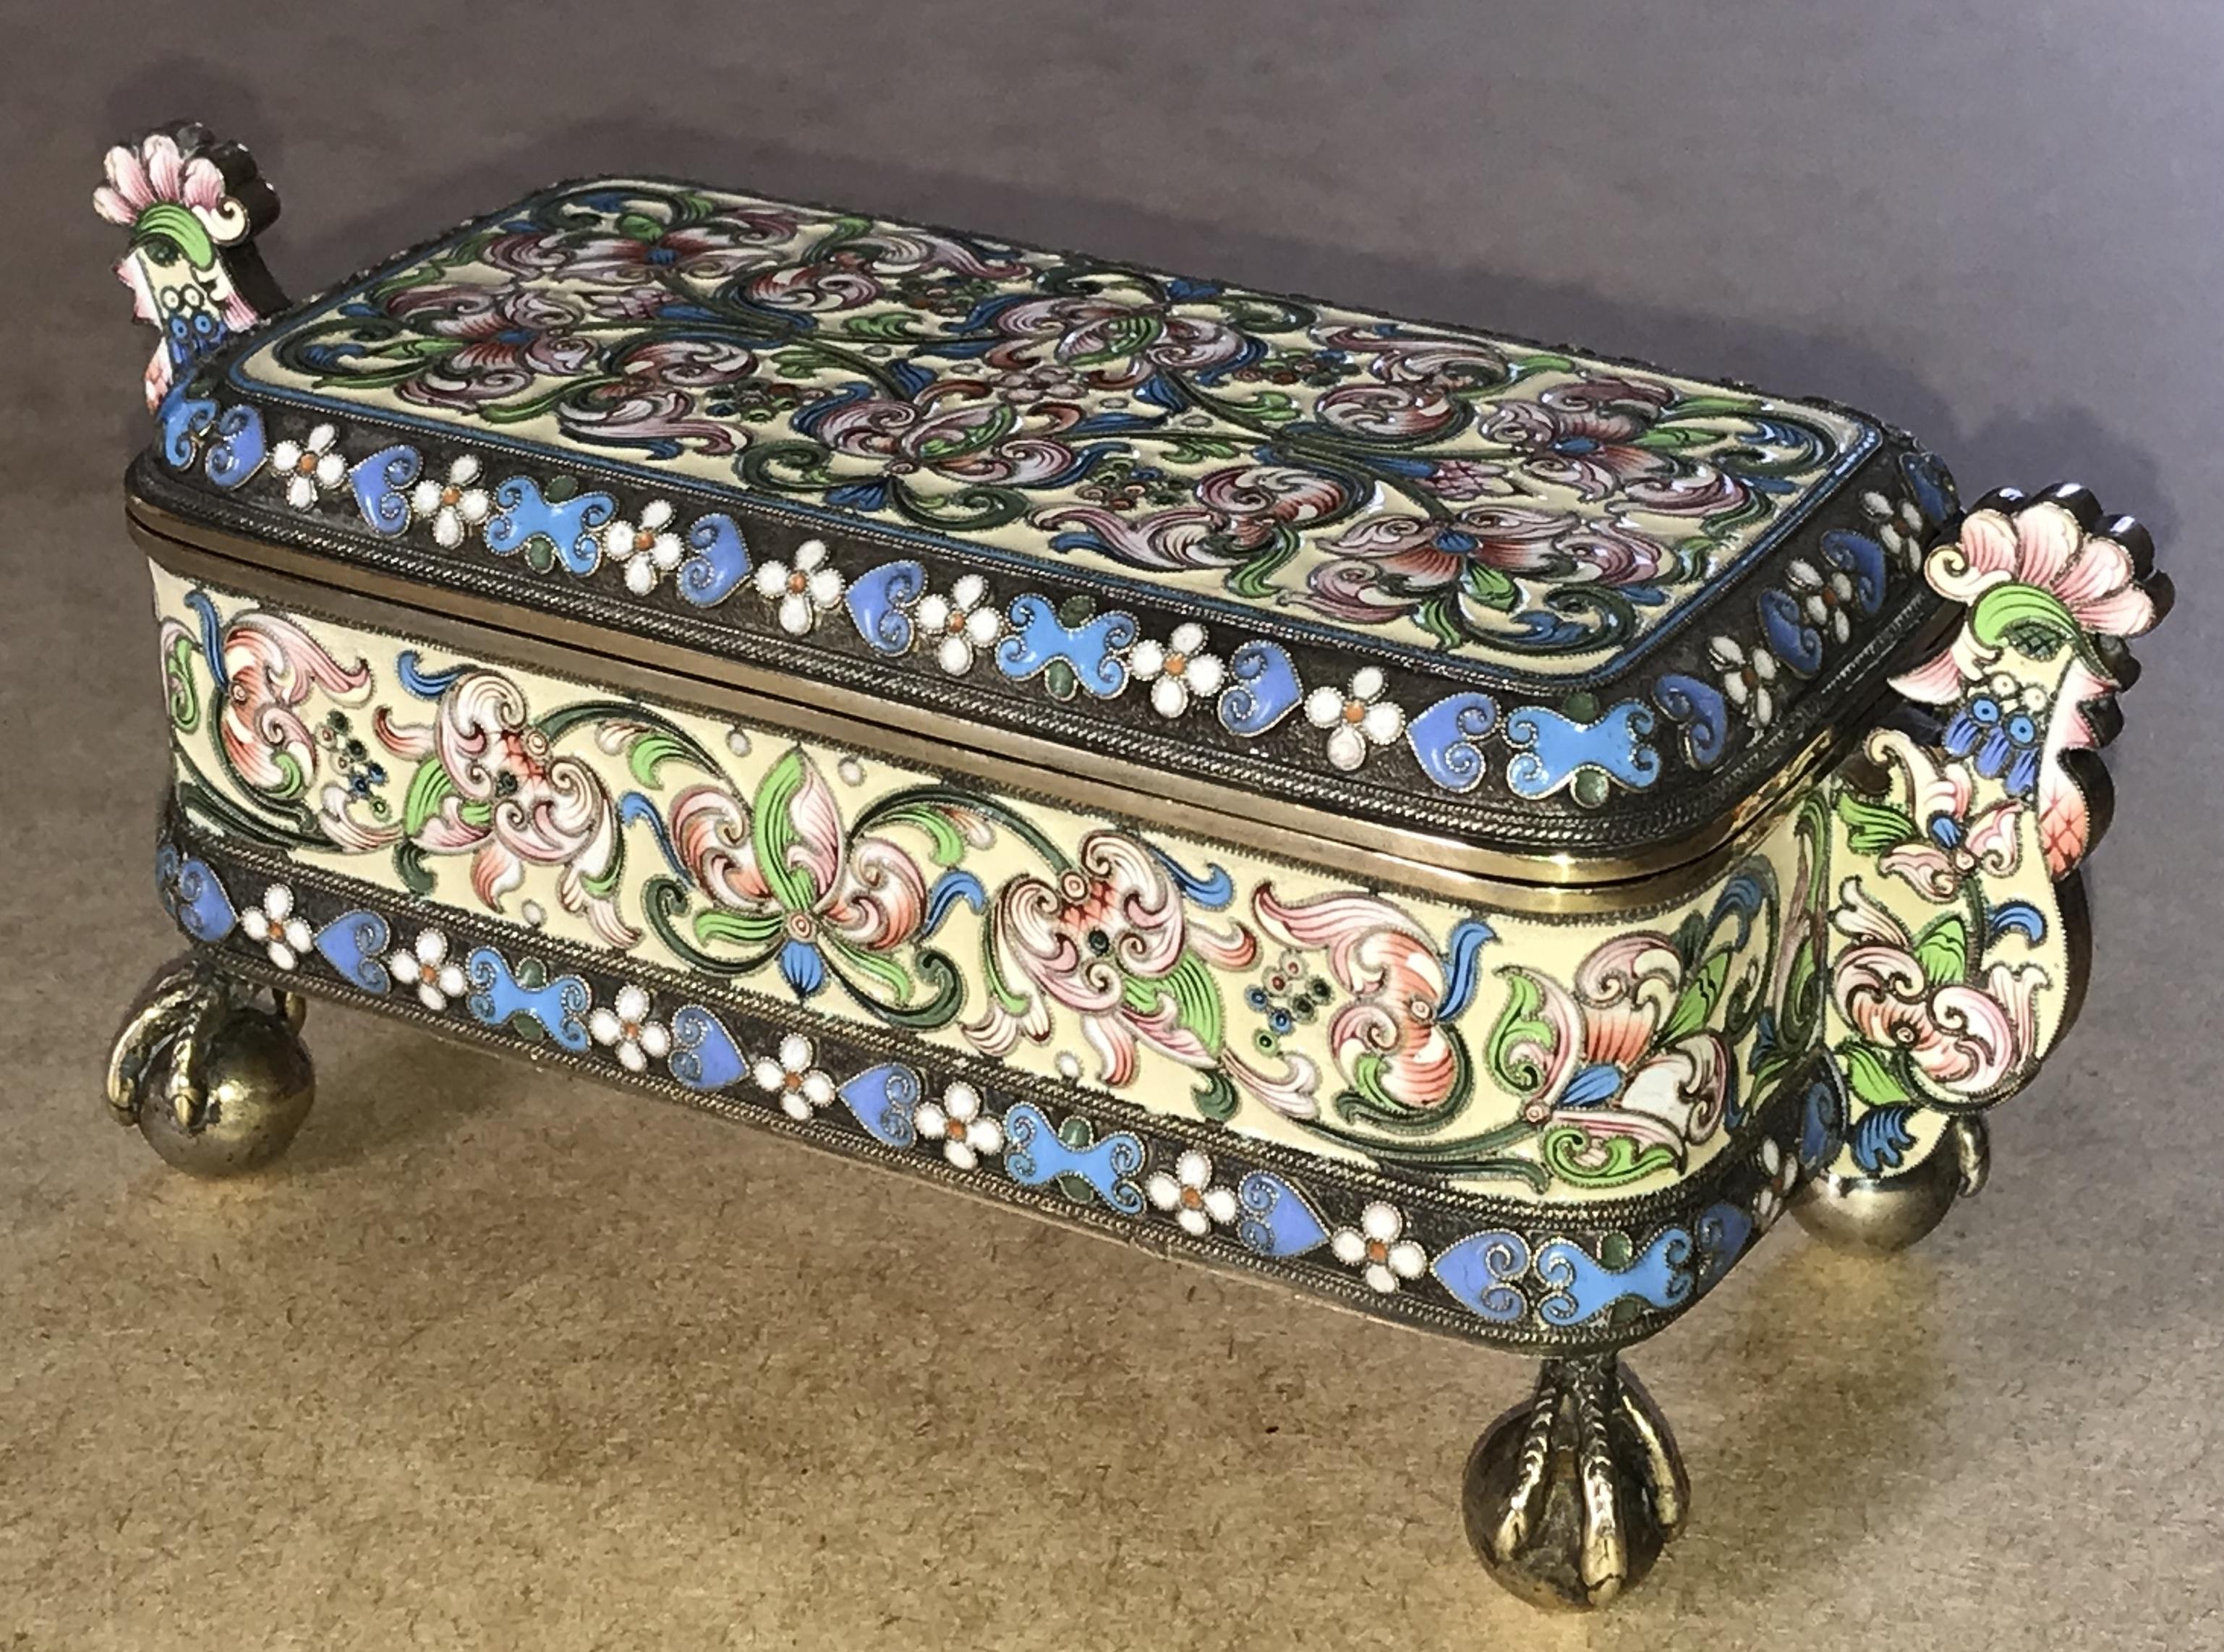 We are delighted to offer for sale this stunning and very rare full sized Imperial Russian 1891 Cloisonné enamel casket box made from solid silver with gold gilding by the highly coveted Pavel Ovchinnikov whilst he worked with Ivan Khlebnikov